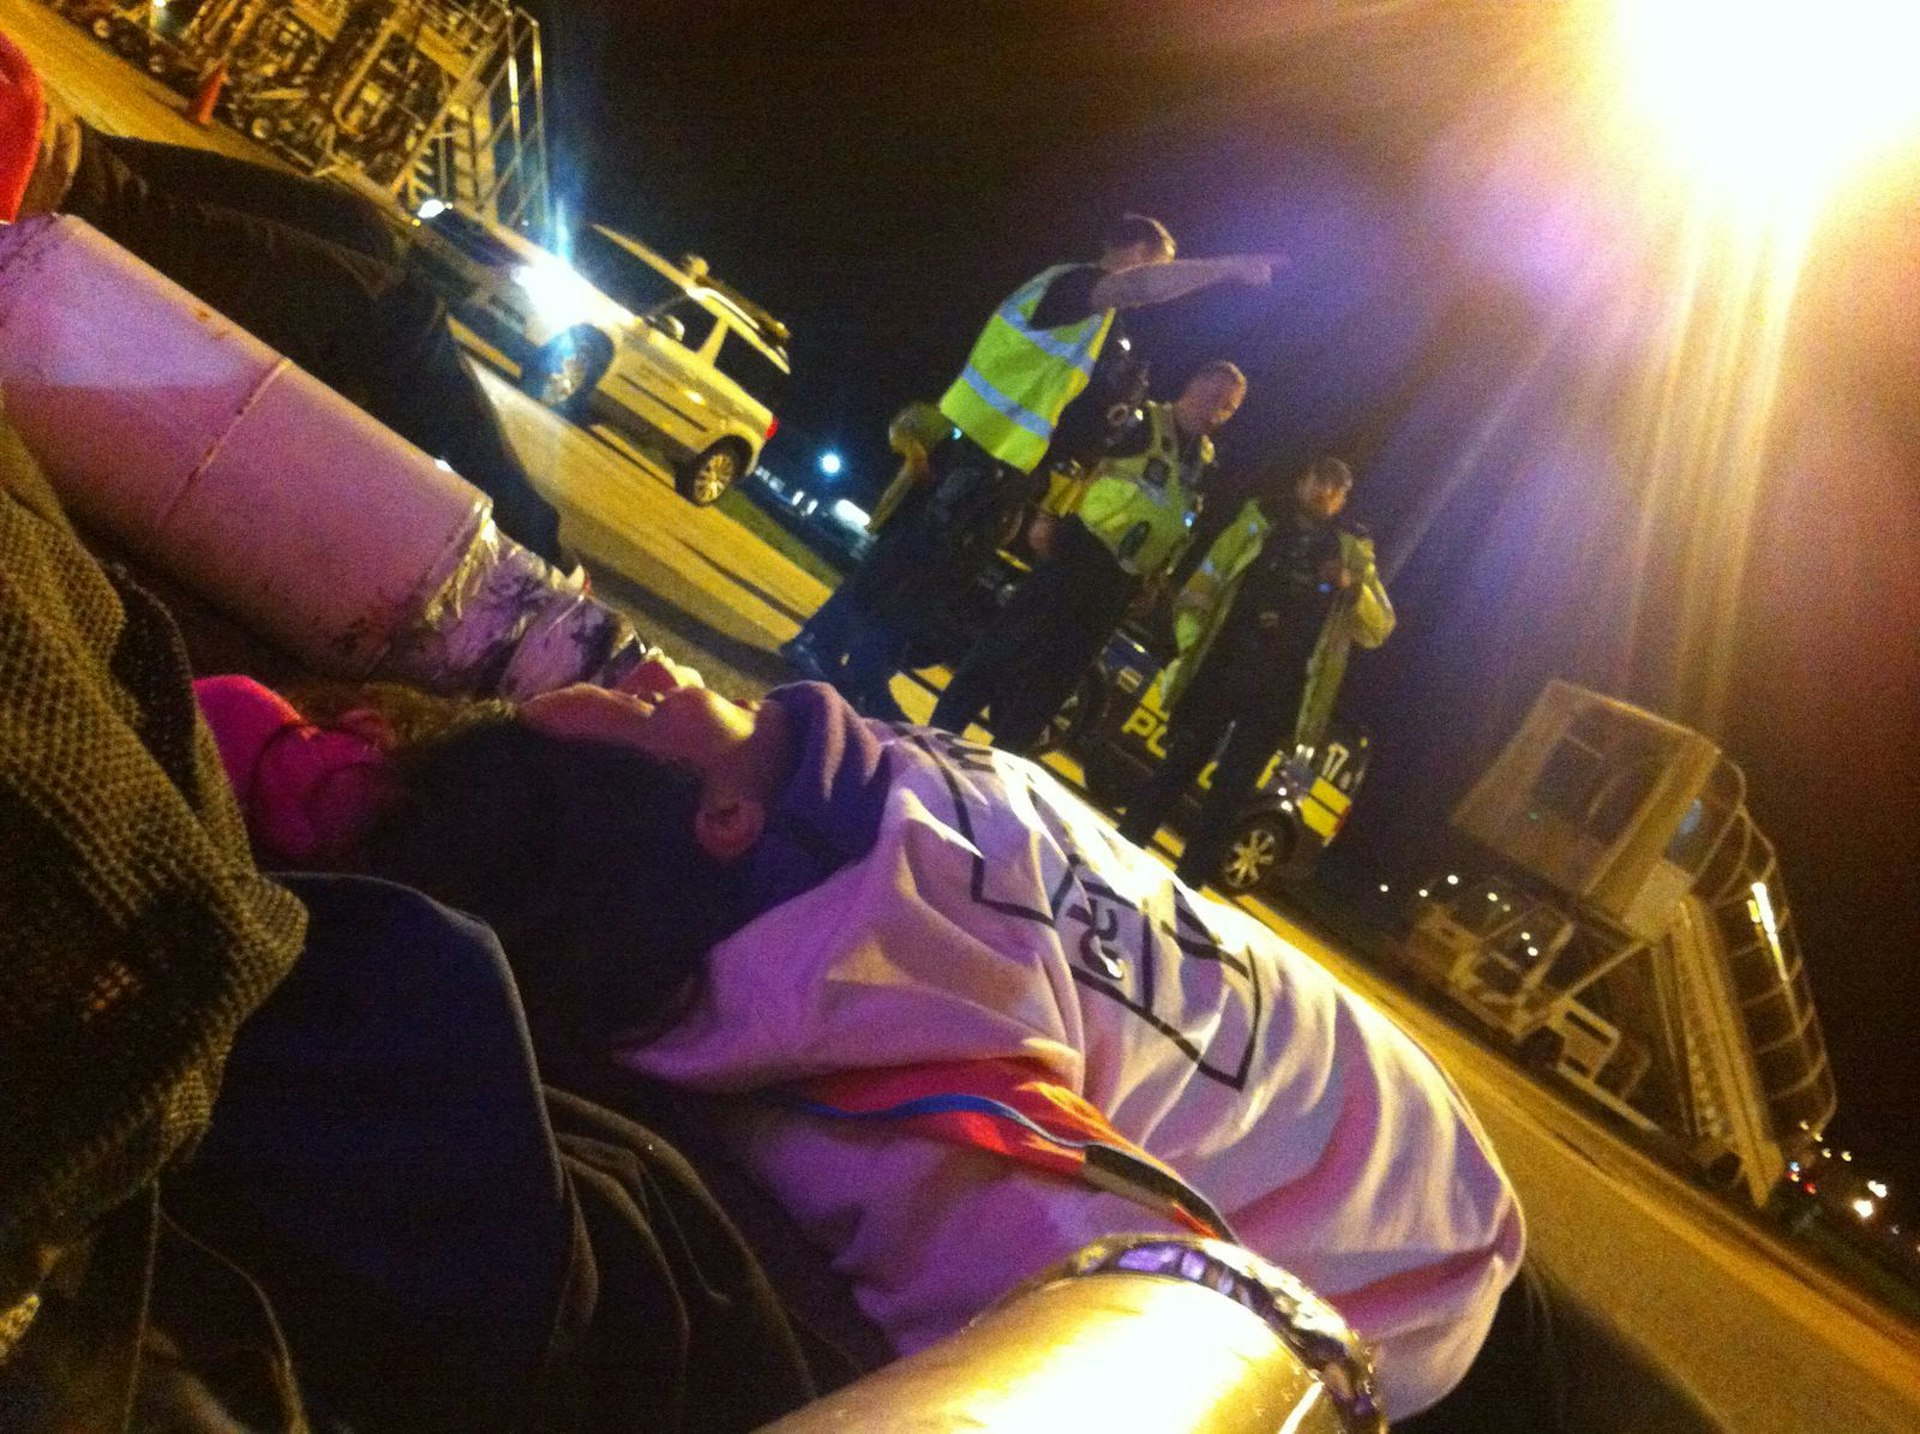 Exclusive: Activists are blockading Stansted's runway to stop deportation flight